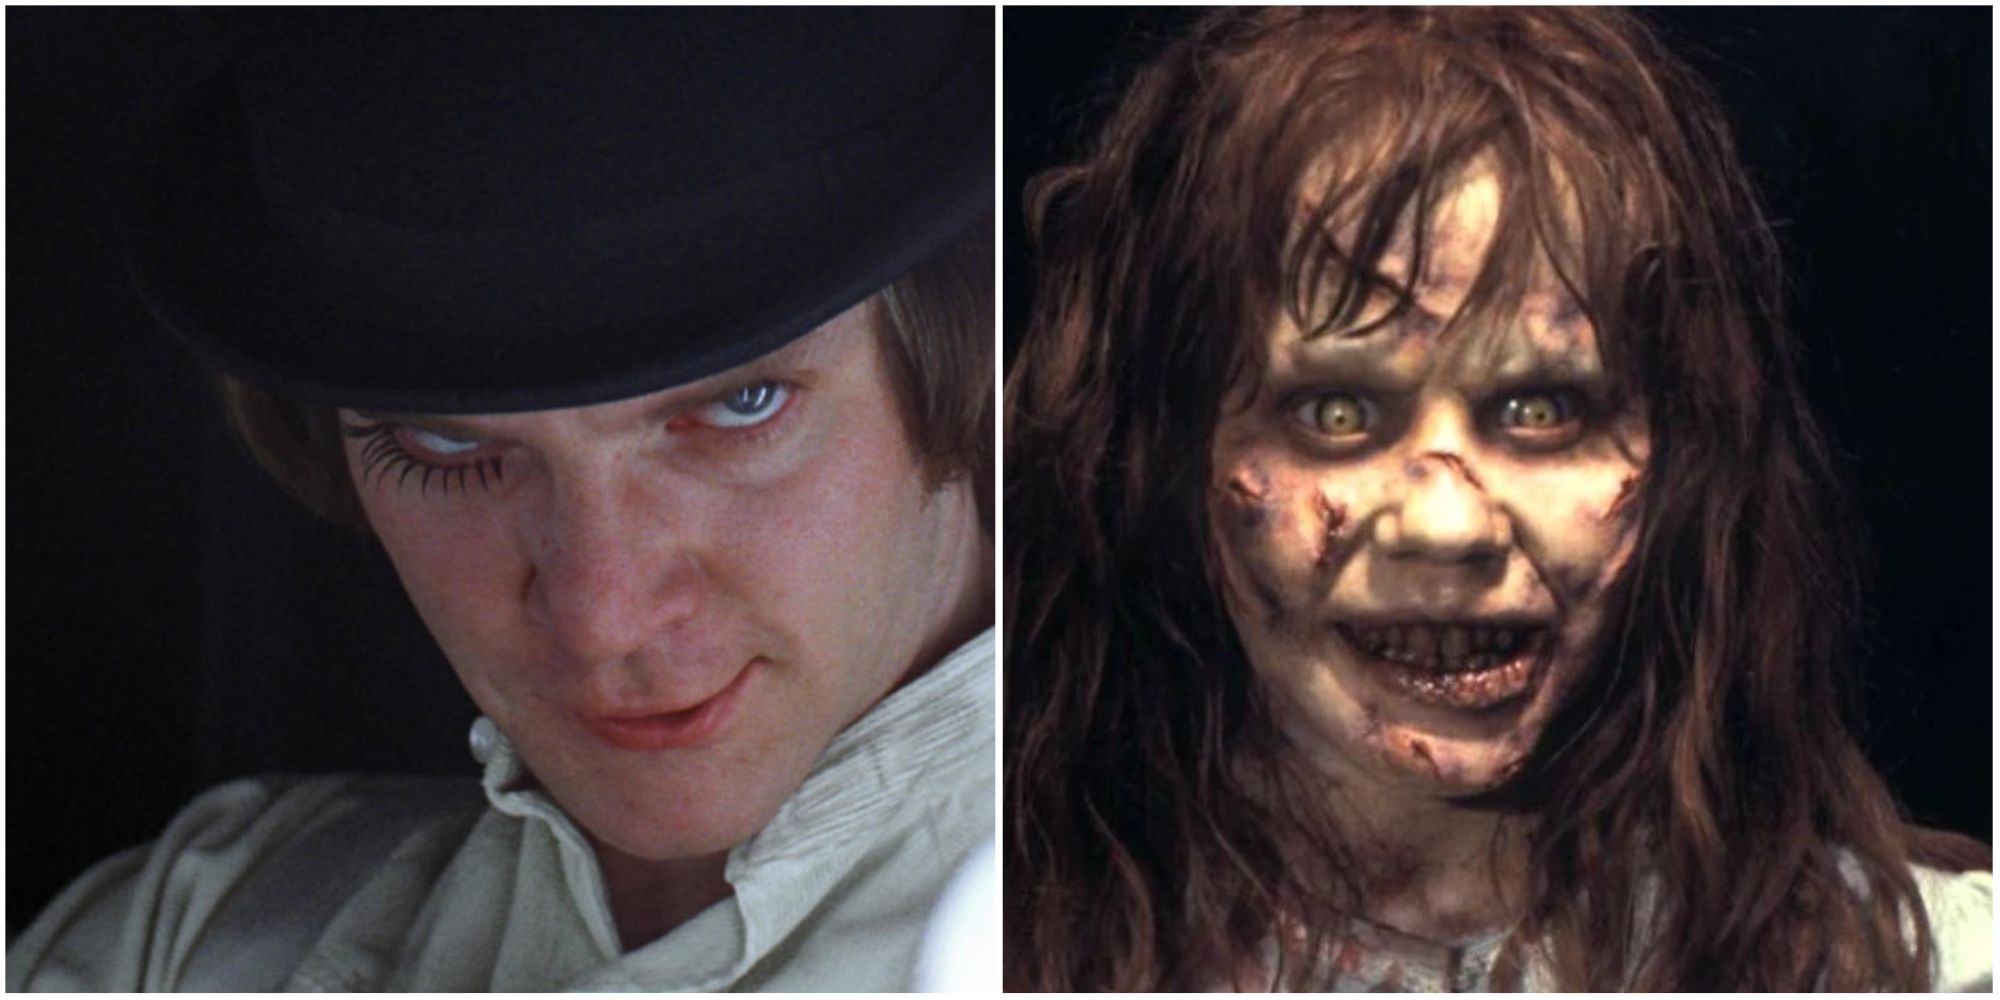 Smile: 10 Scariest Faces In Horror Movies, According To Reddit